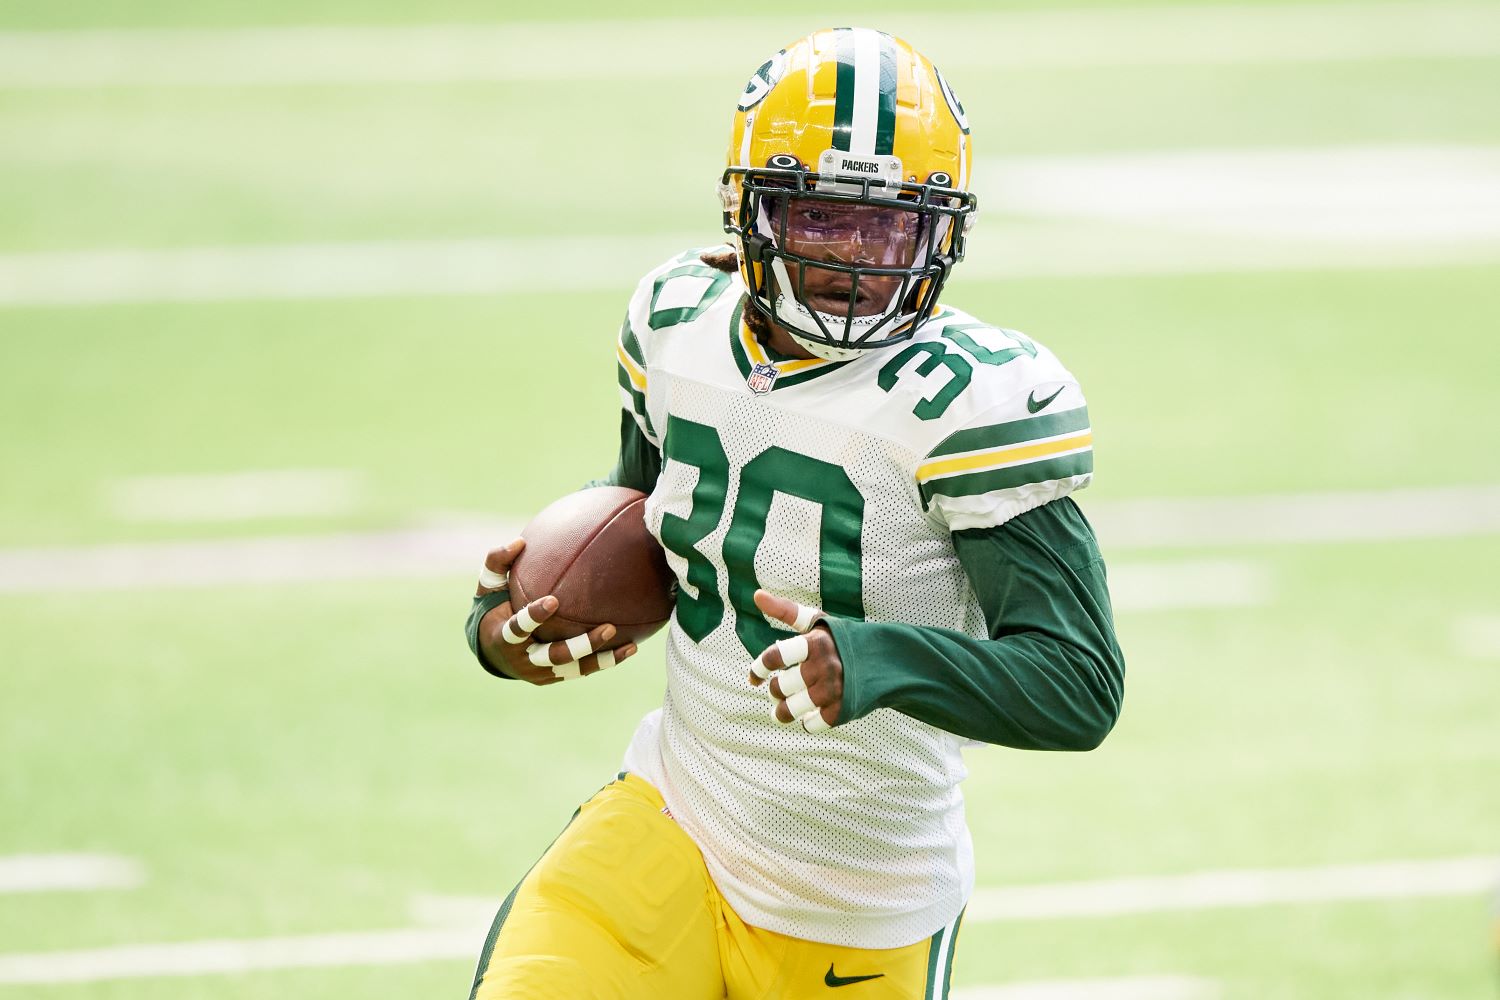 With Jamaal Williams unavailable for Thursday, who will the Green Bay Packers utilize at running back?